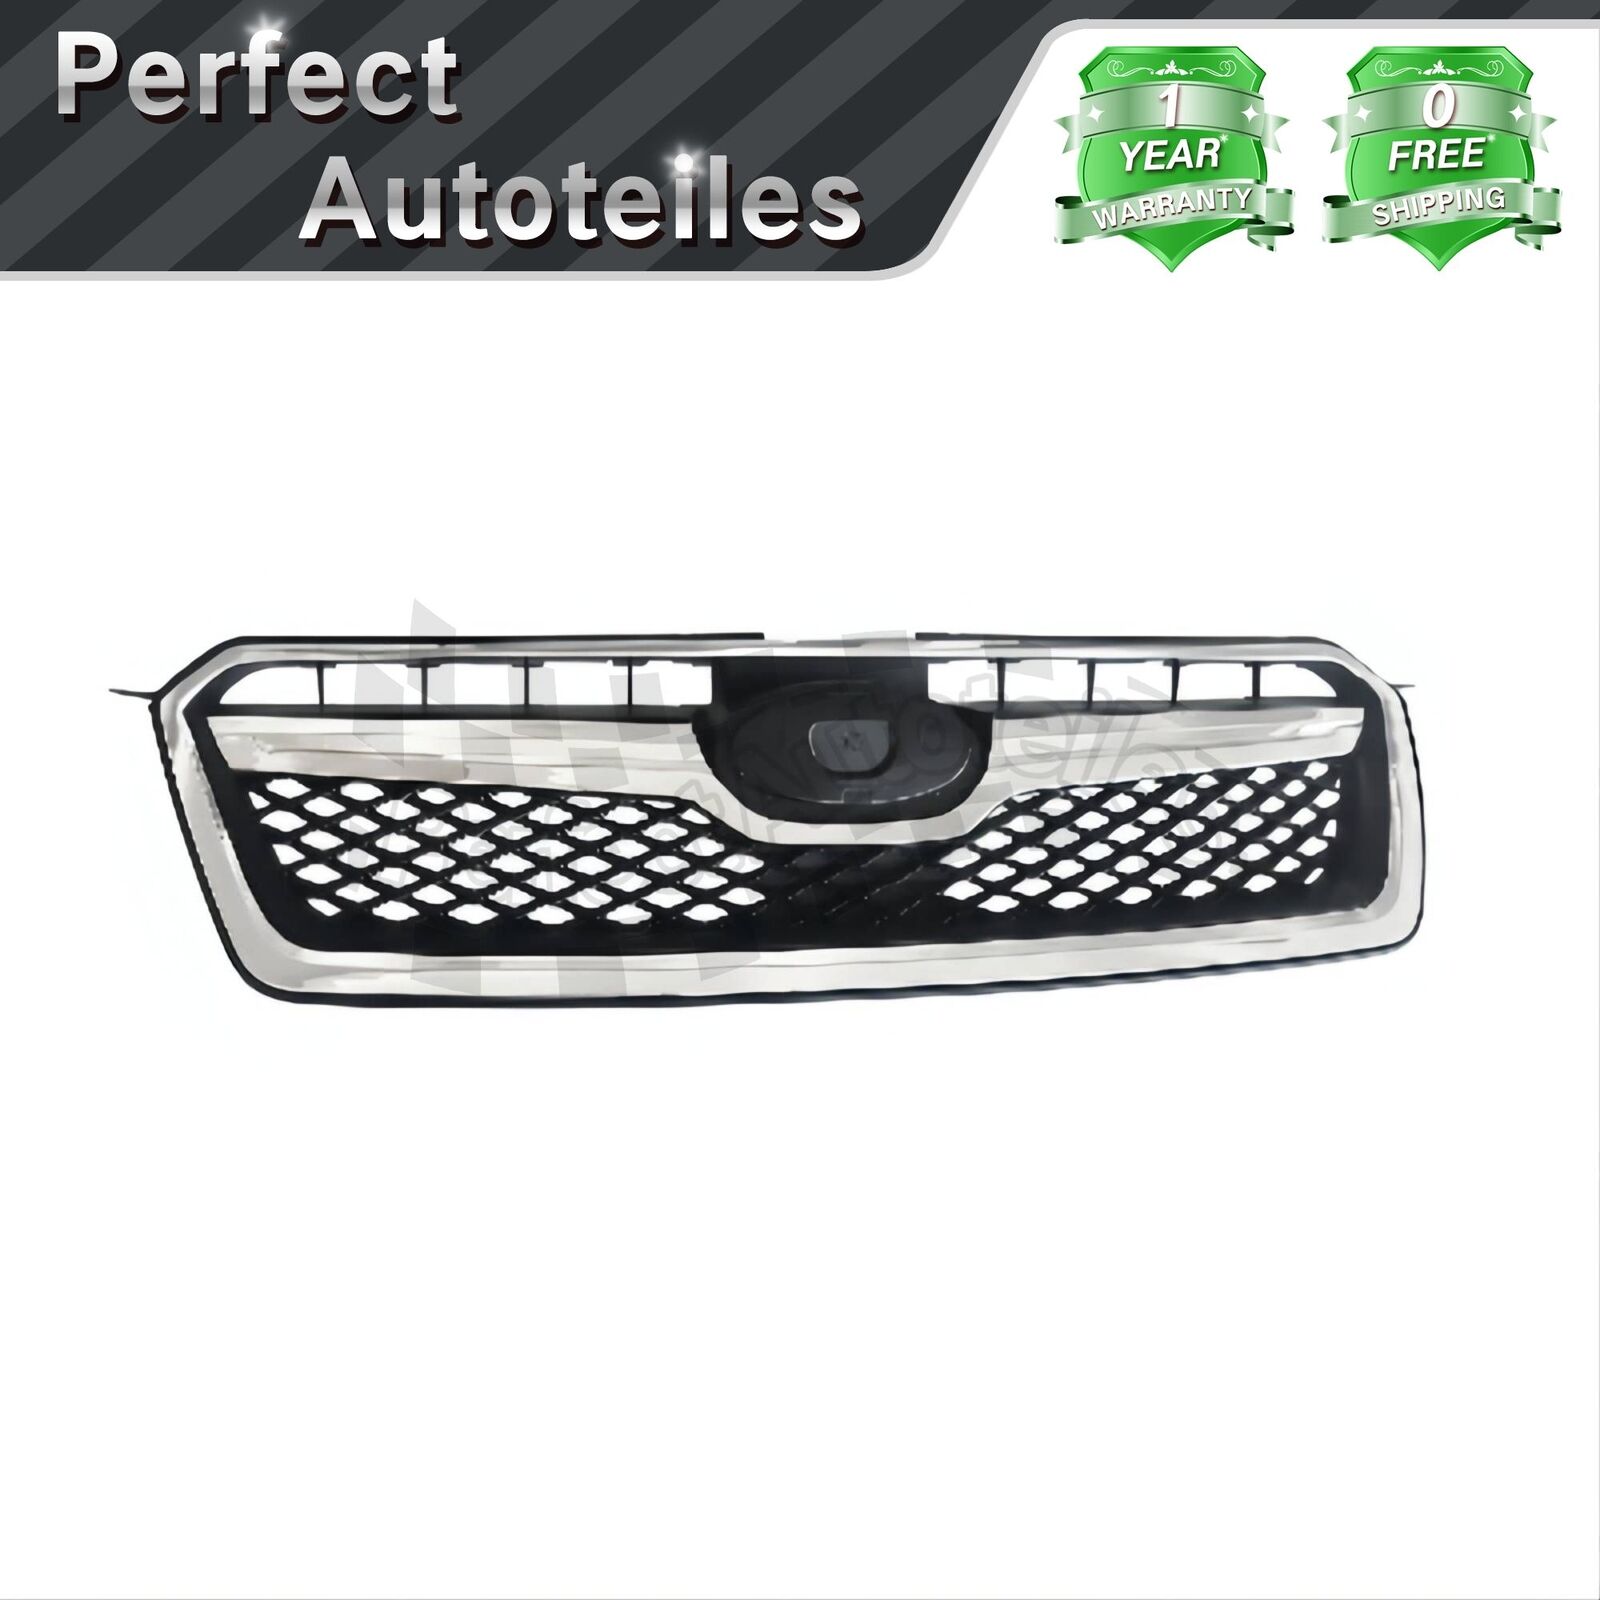 New Front Grille Assembly W/ Chrome Trim Fits for 16-17 Subaru XV Crosstrek